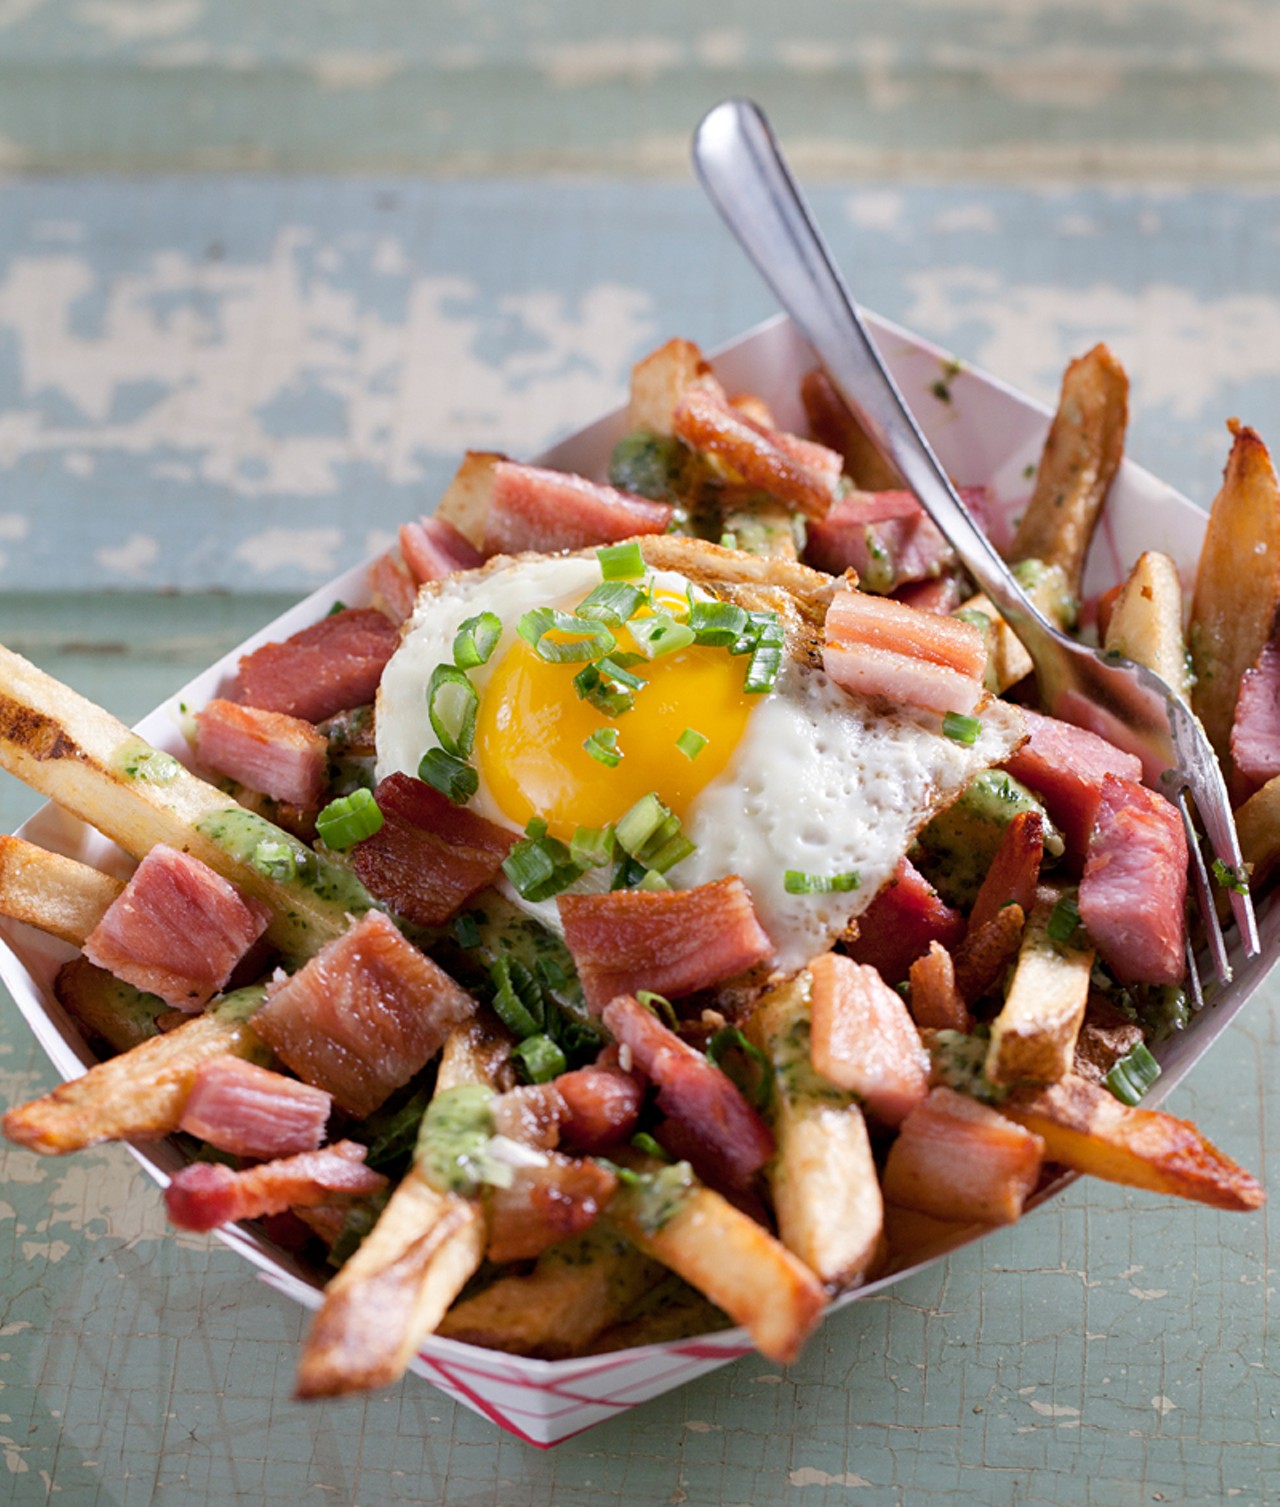 One of the menu's "Boardwalk Fries," the "Green Eggs N Ham" is fresh cut Idaho russett potatoes tossed in sea salt, a fried egg, diced ham, creamed spinach, and green onion.